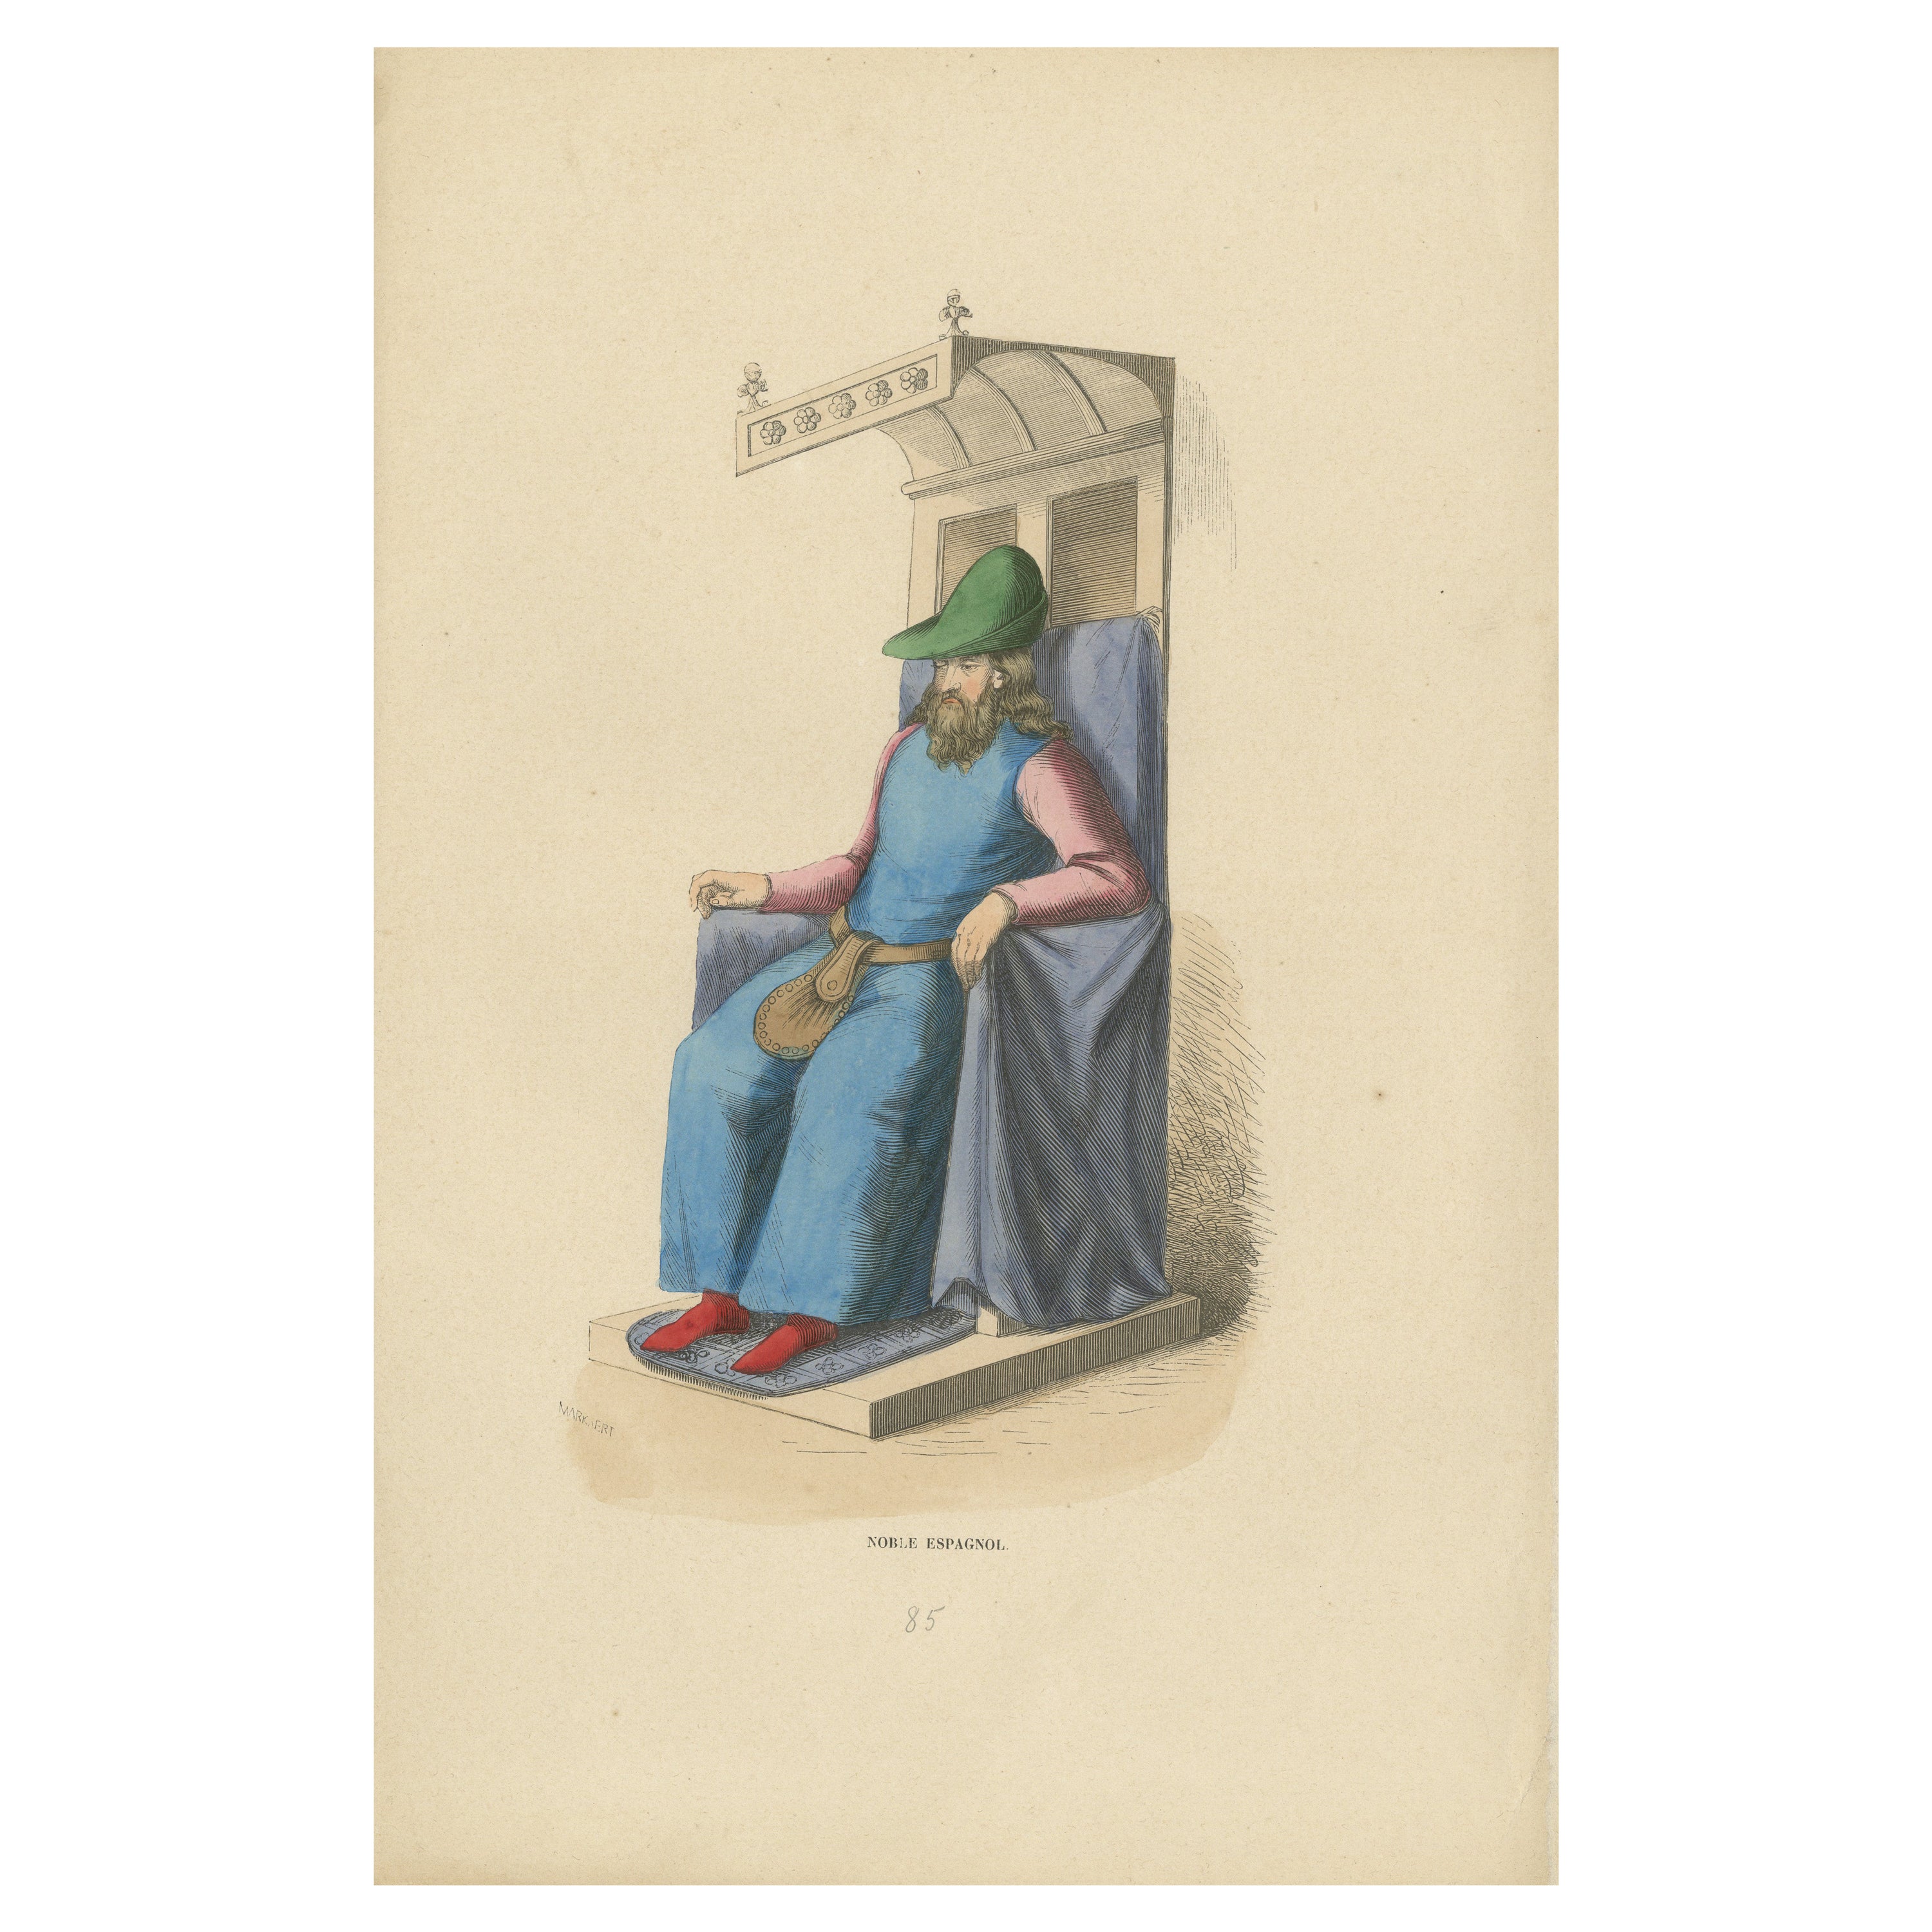 Seated Spanish Nobleman: The Visage of Authority, 1847